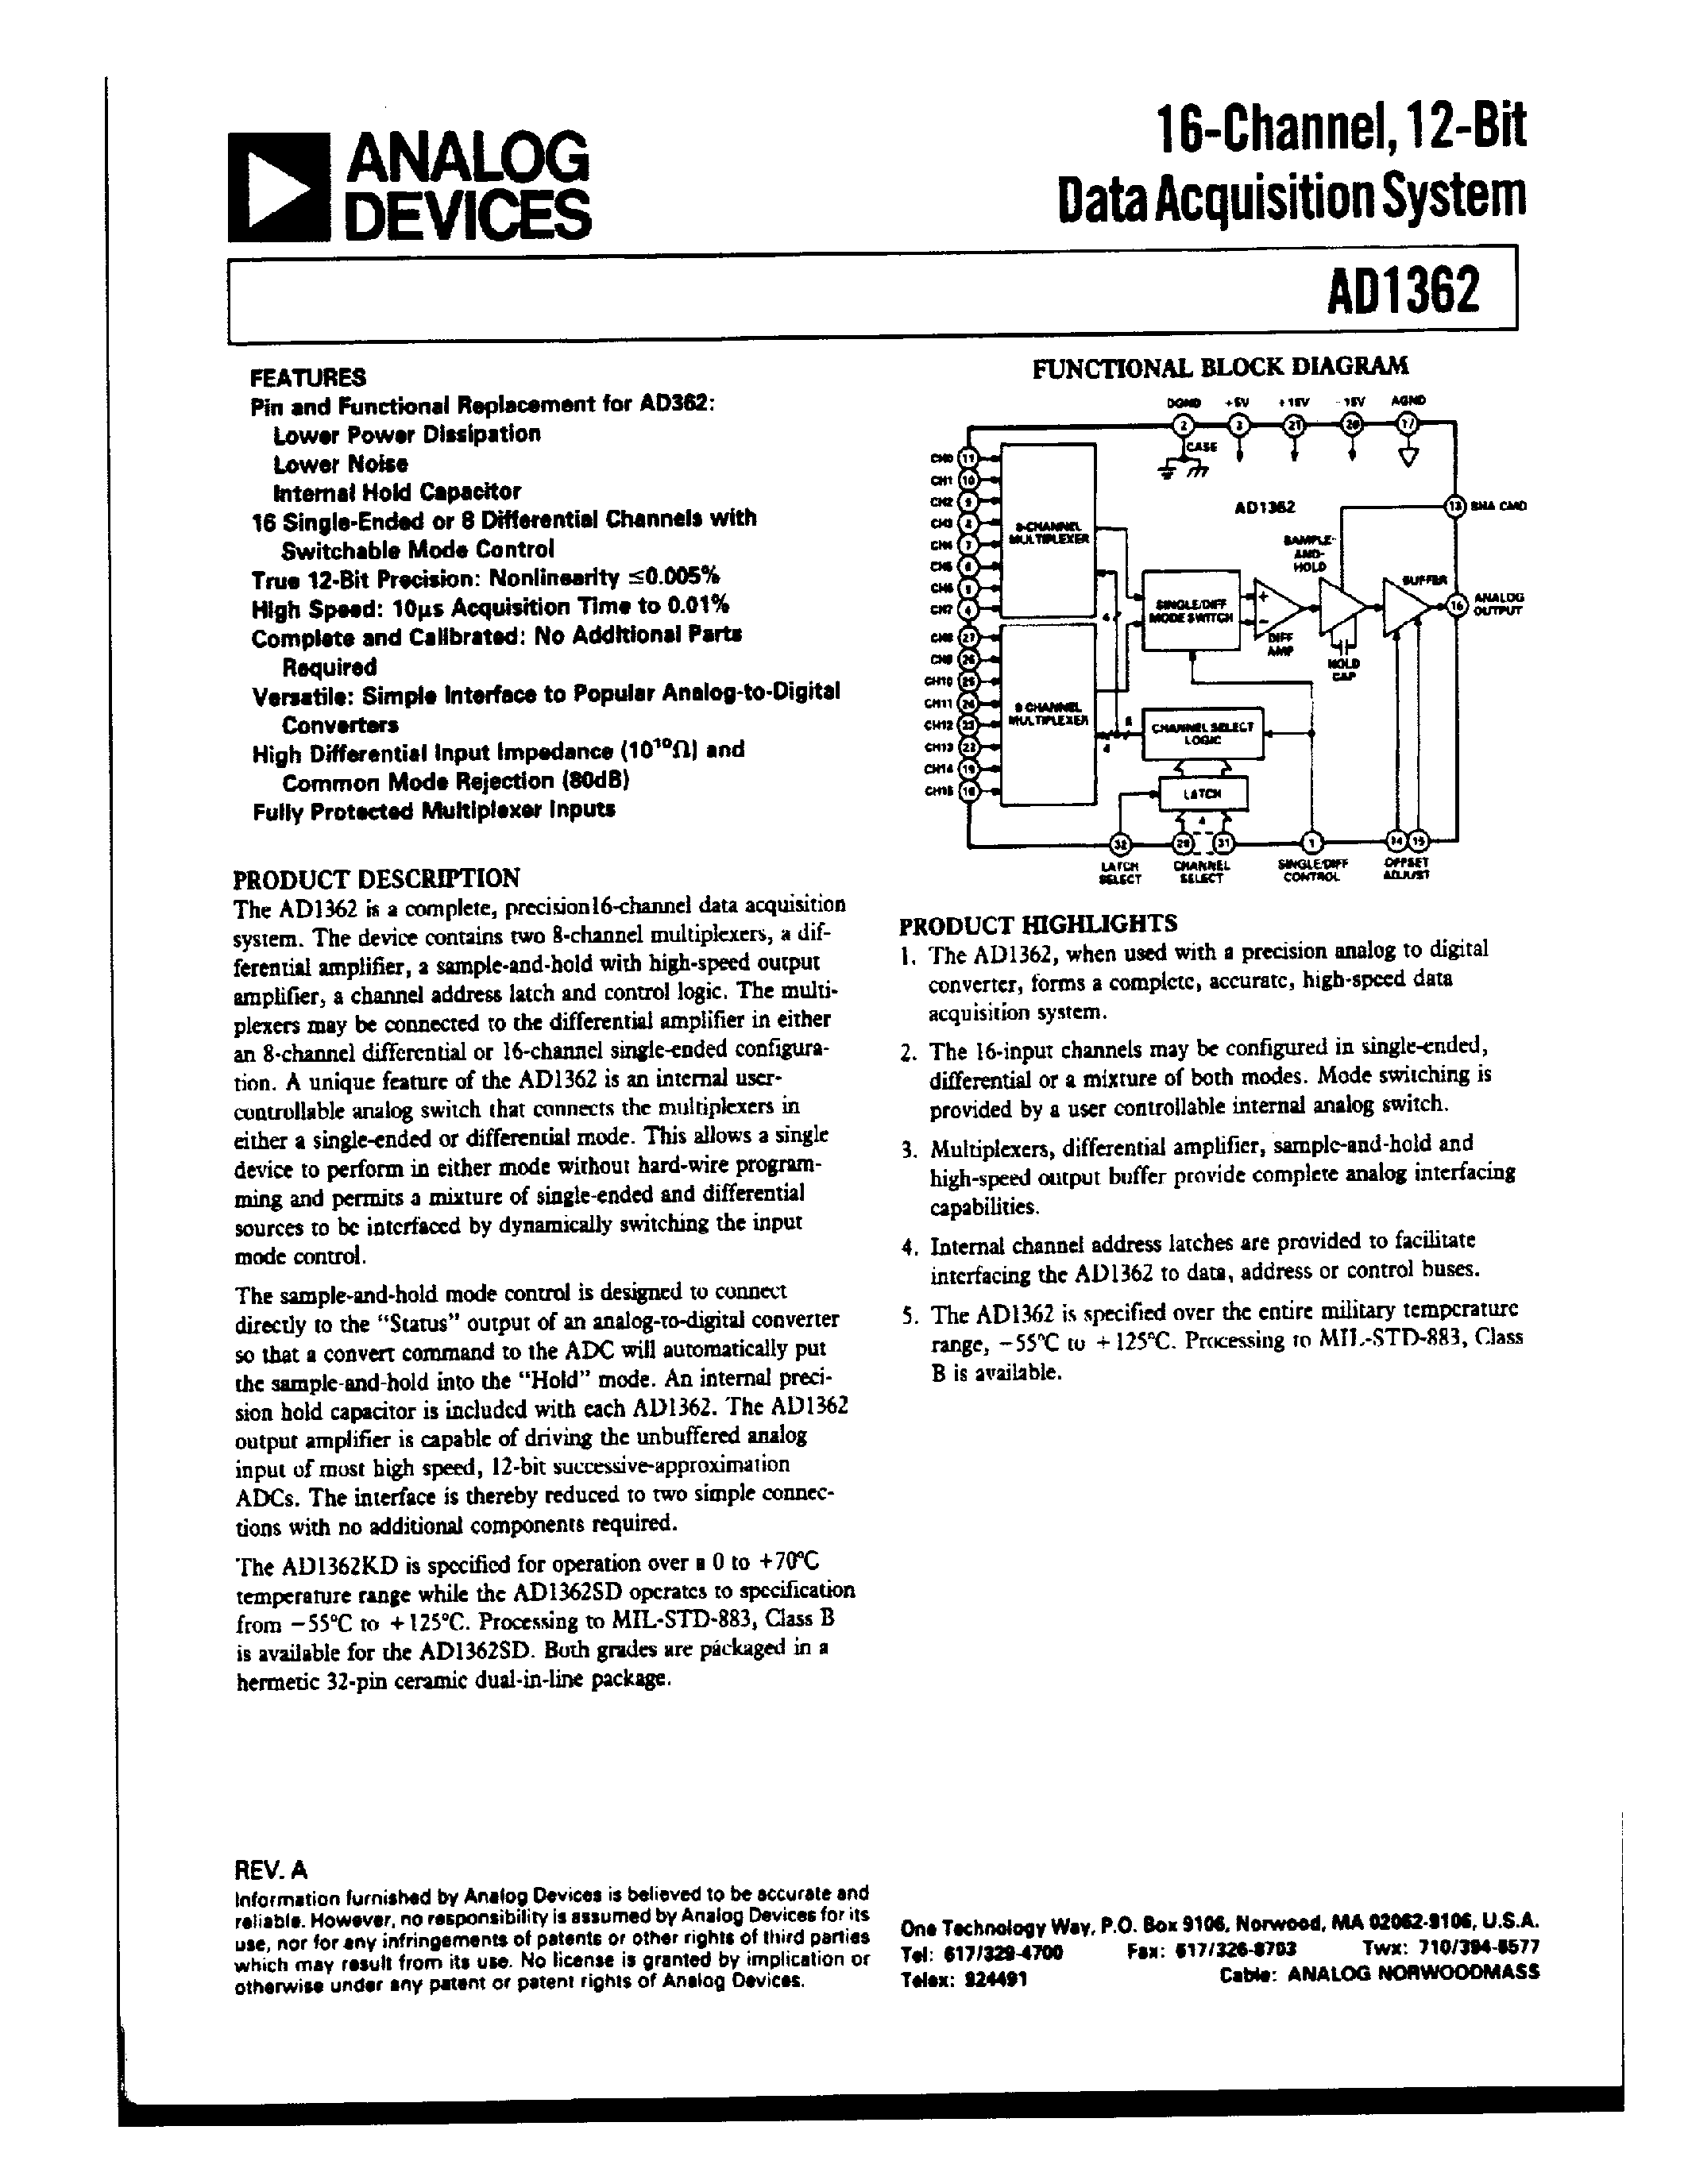 Datasheet AD1362 - 16-Channel/12-Bit Data Acquisition System page 1